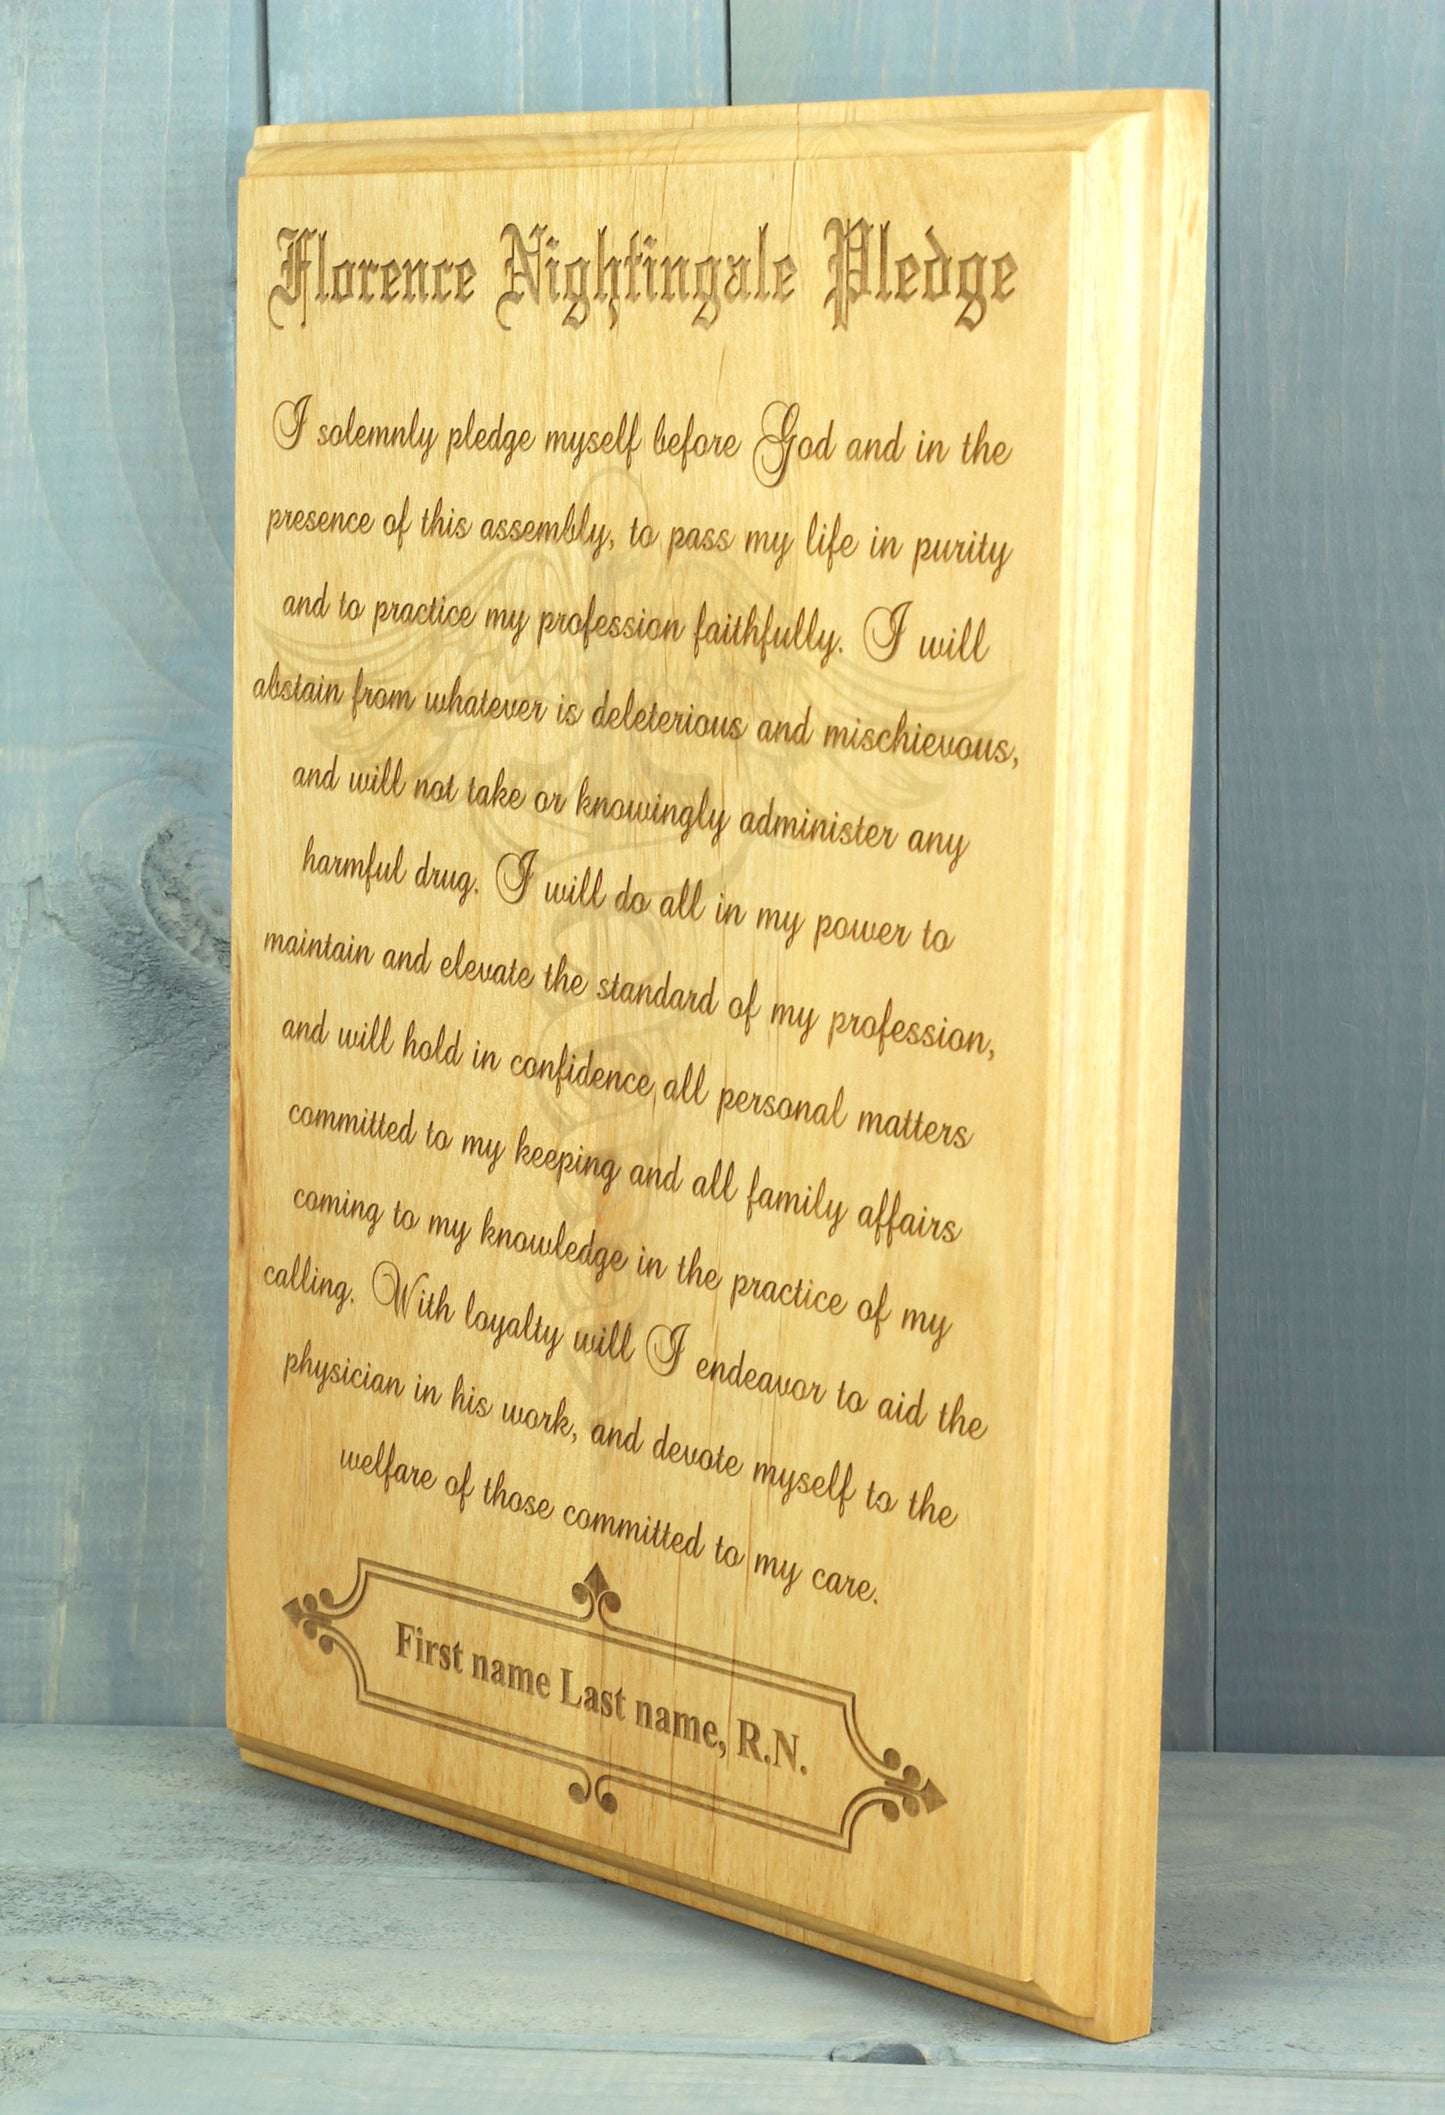 Florence Nightingale Pledge with Caduceus Plaque - Personalized